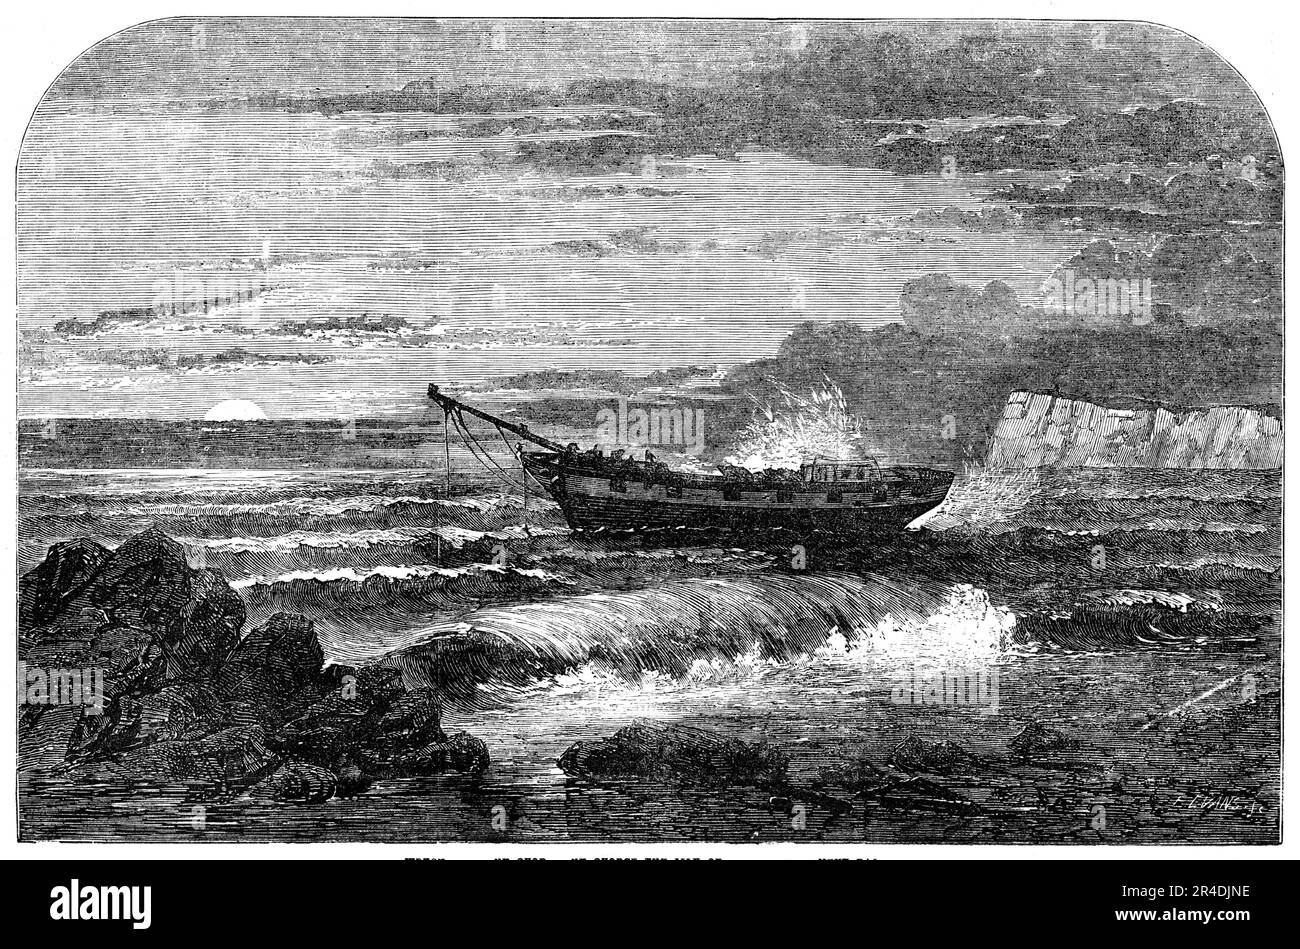 Wreck of &quot;The George Lord&quot;, off the Isle of Wight, 1856. Ship bound for London, '...laden with a valuable cargo of fruit from Zante. She encountered foggy weather in the Channel, and the master, being out of his reckoning, hailed a French vessel, the captain of which informed him that he was off the Lizard Point. Altering his course in consequence, he ran his ship directly upon a reef of rocks which juts out into Brook Bay. The coast-guard, seeing a vessel approaching through the darkness, burnt a blue light and fired pistols, but it was too late for the master to alter his course. S Stock Photo